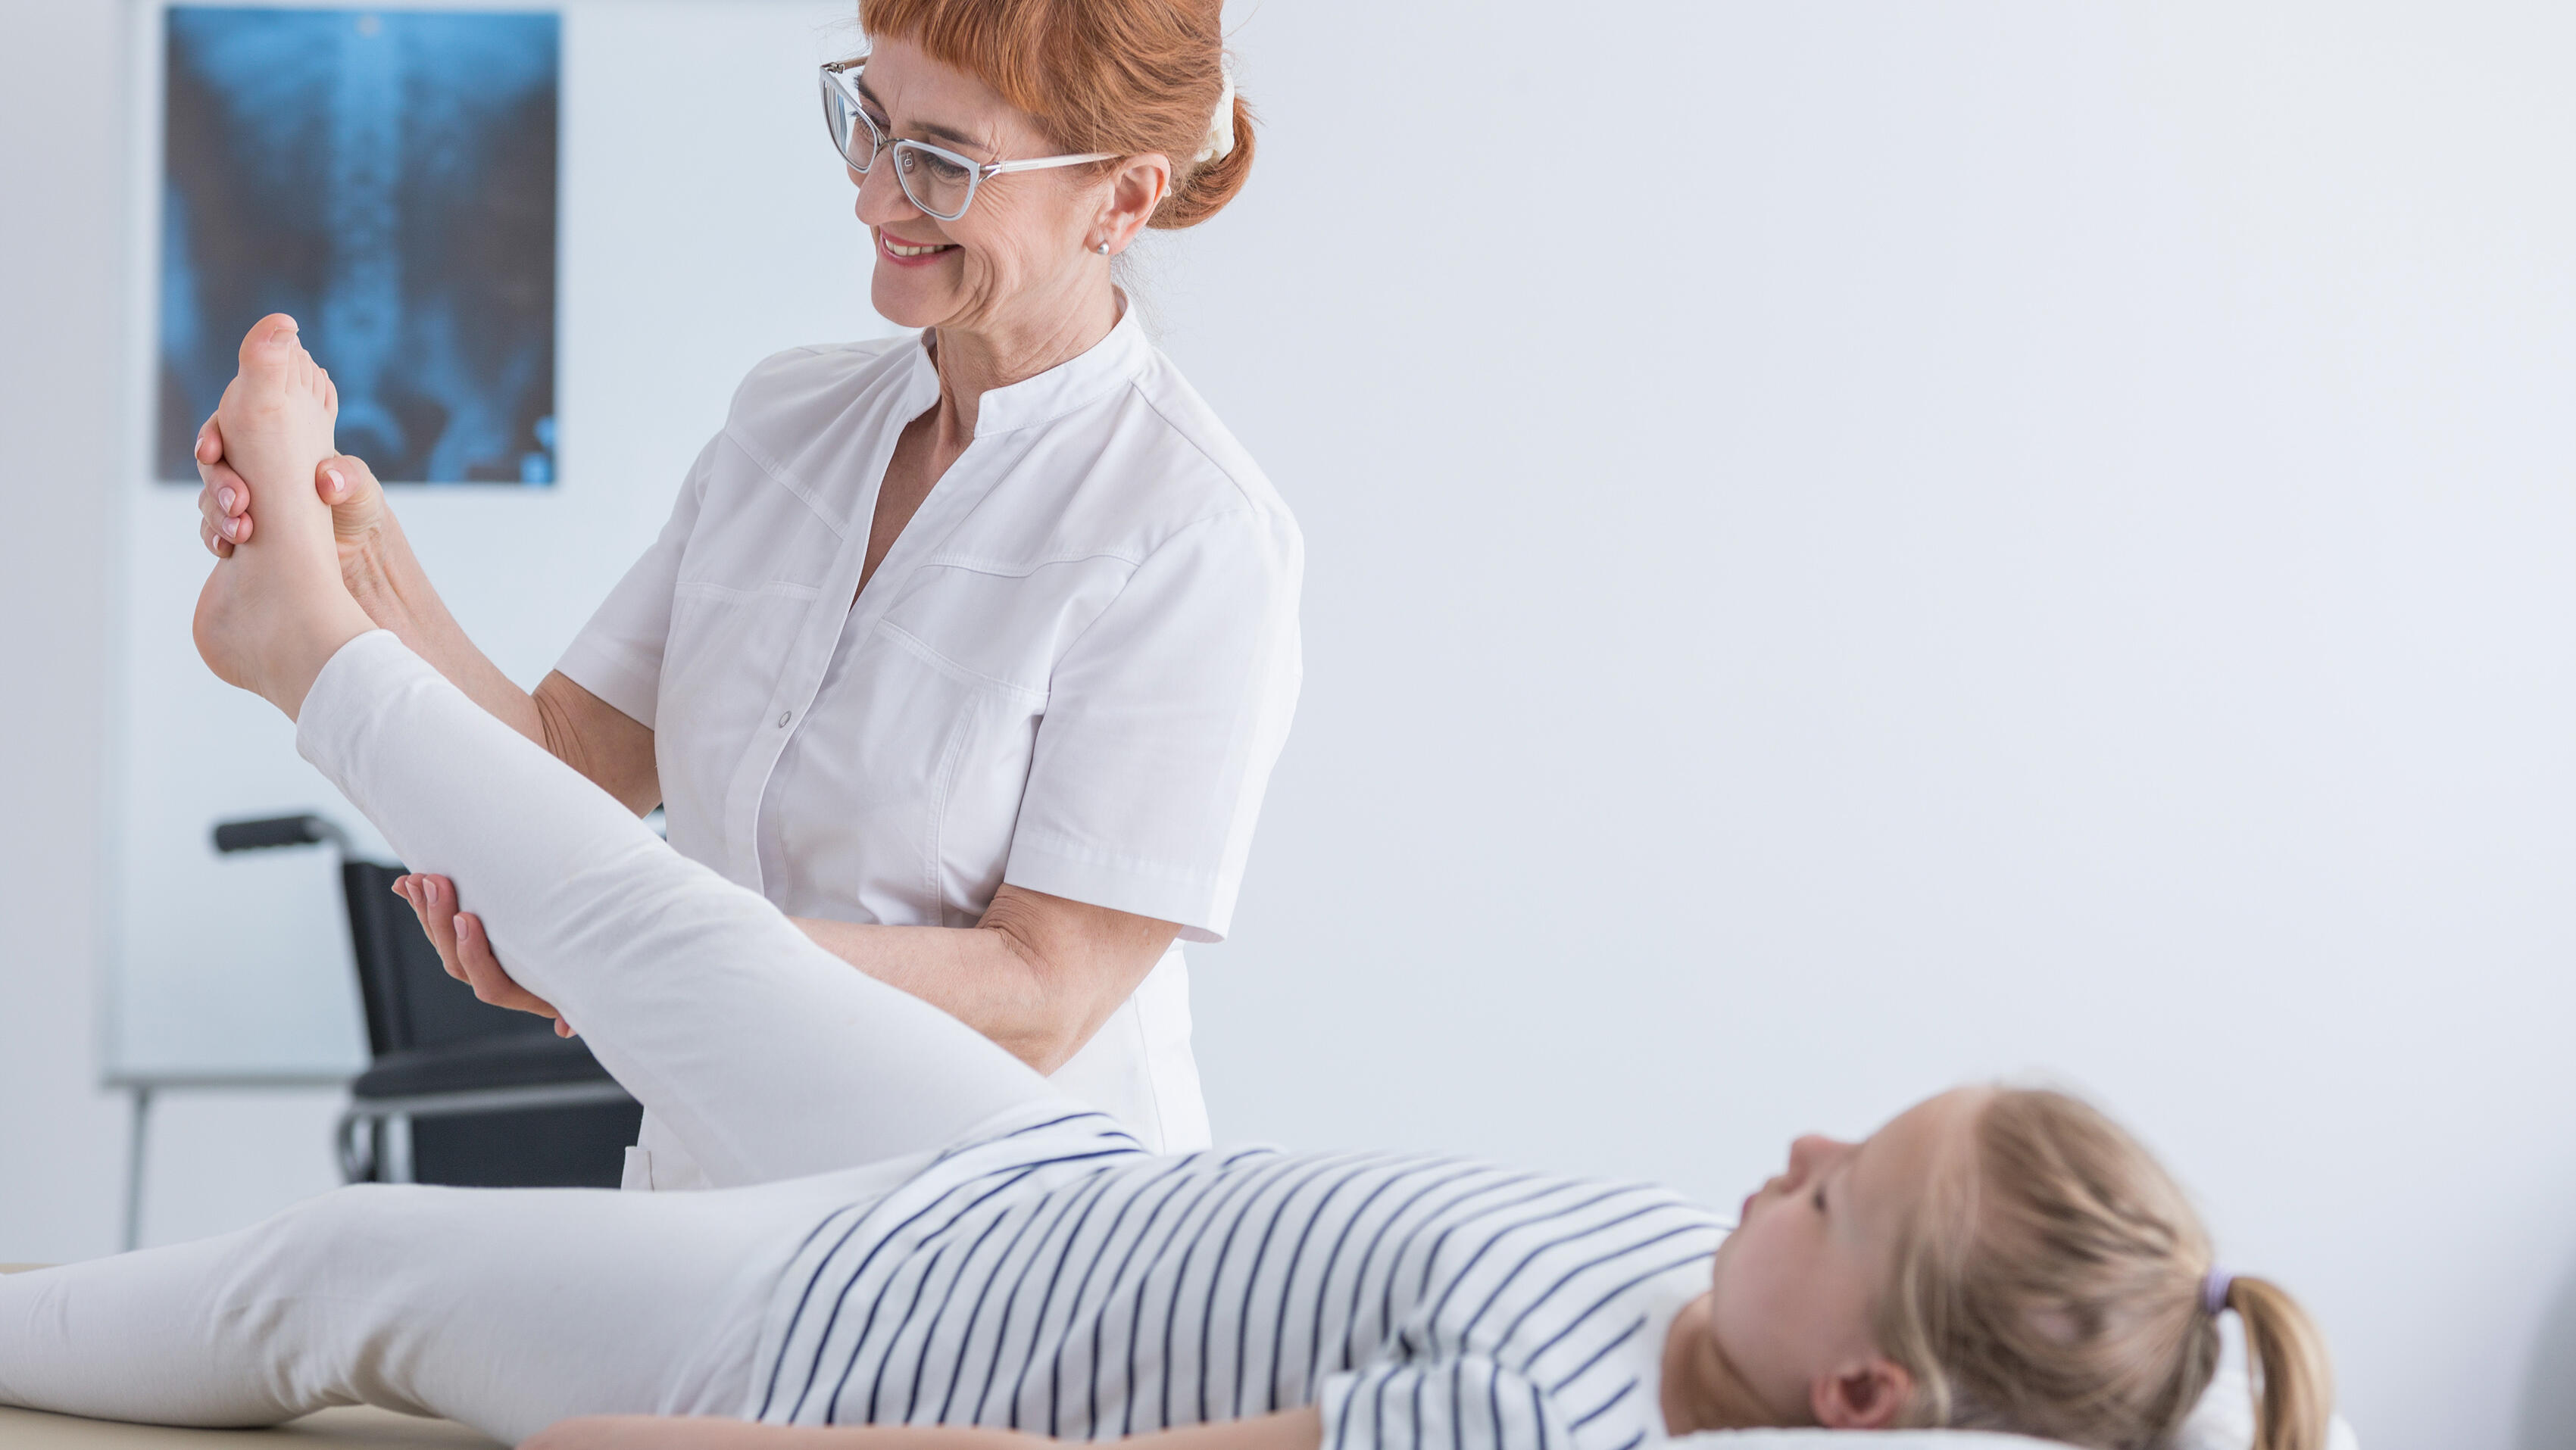 Health Sciences - Pre-Occupational Therapy - Physiotherapist in pediatric scoliosis clinic